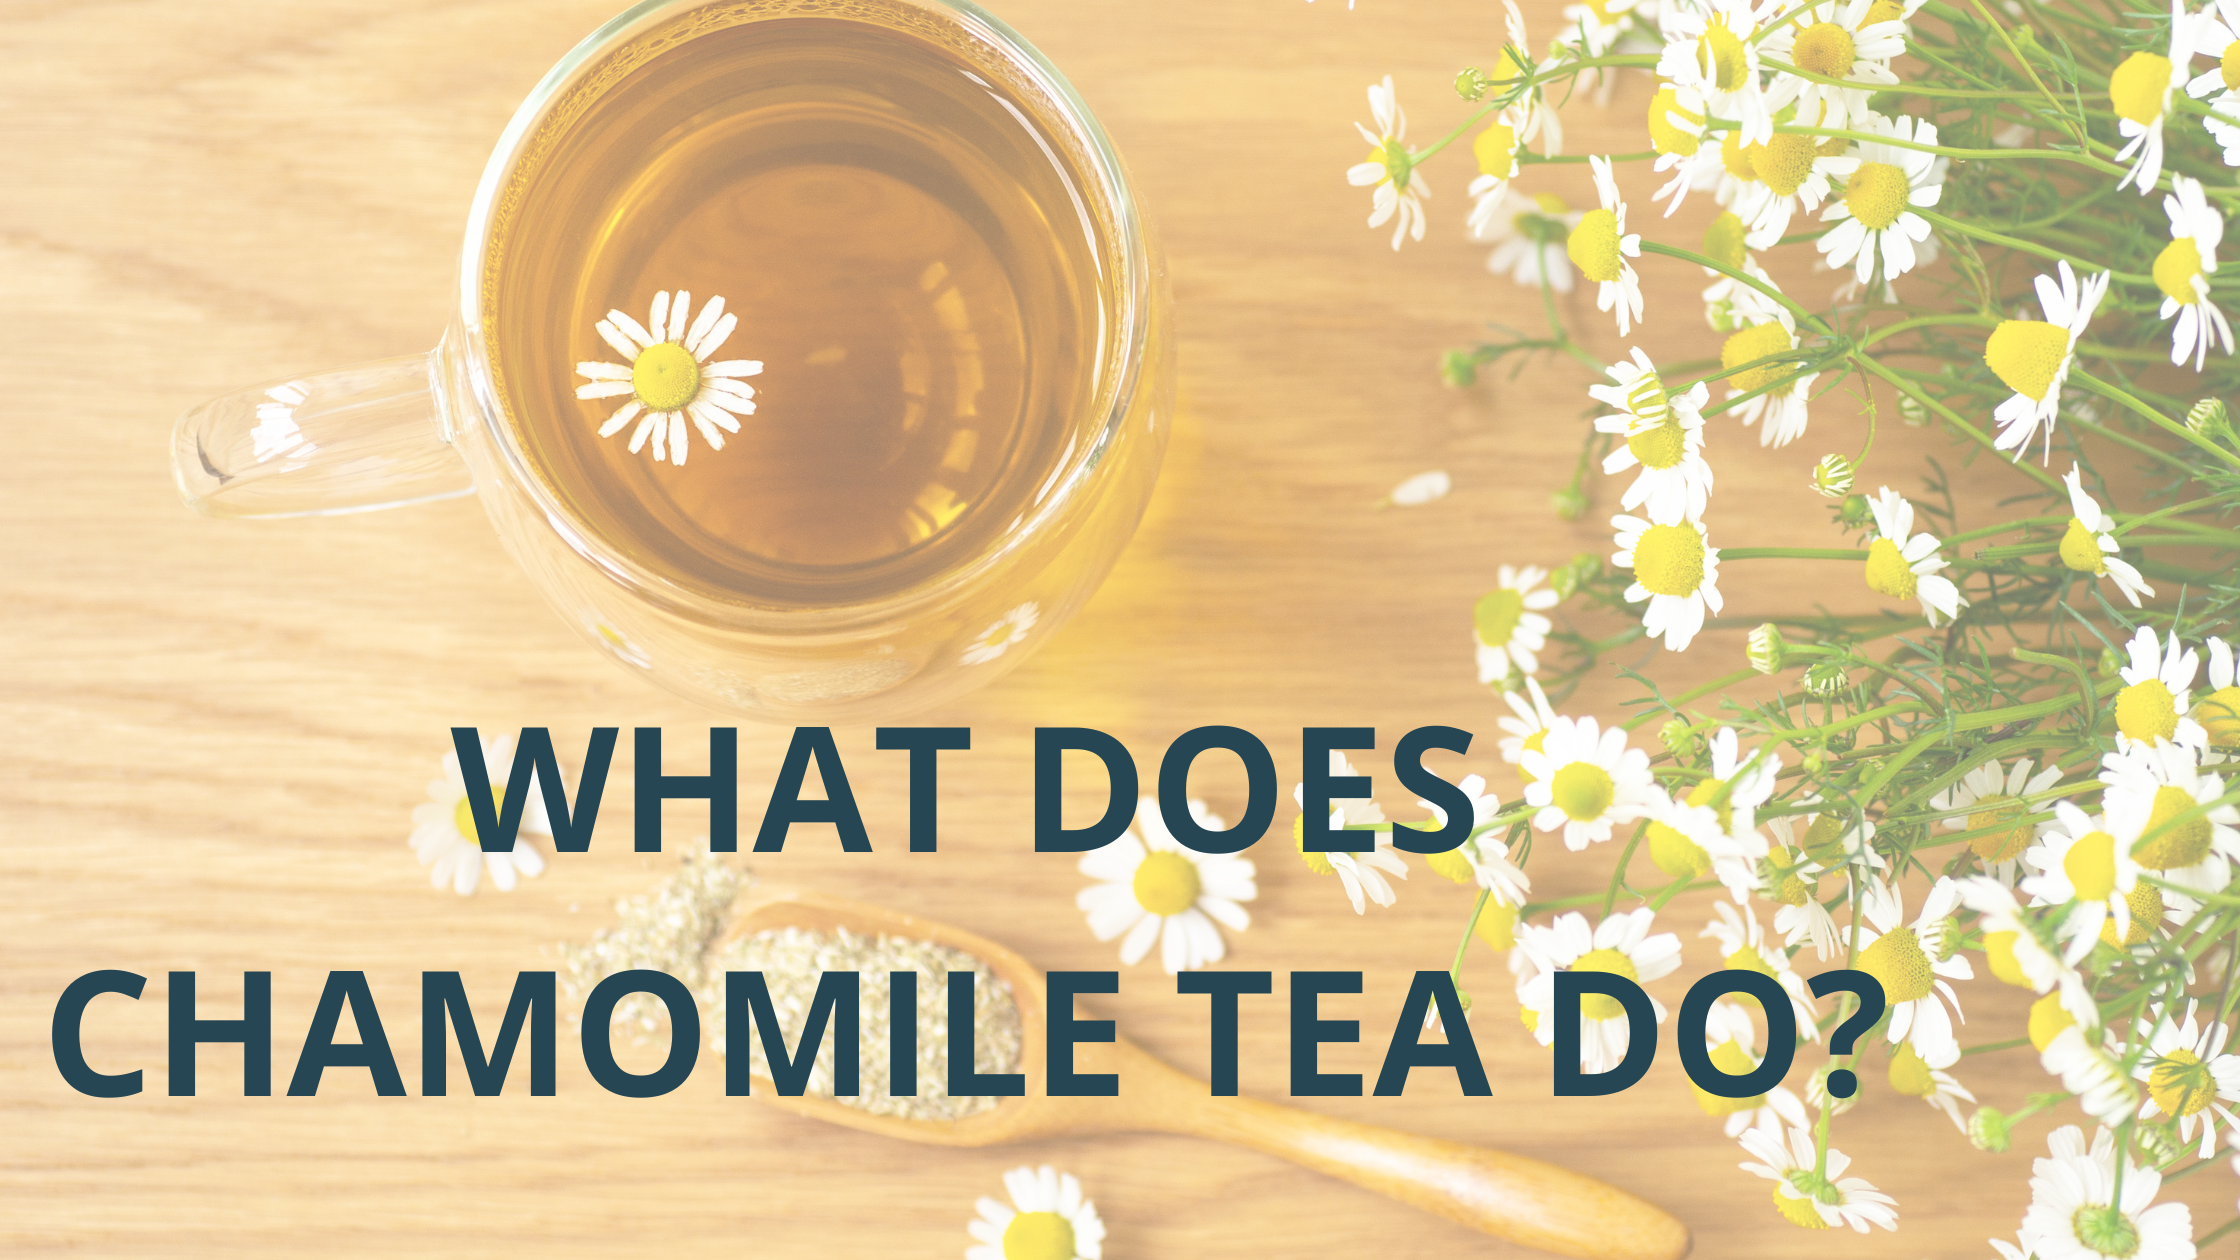 What Does Chamomile Tea Do?